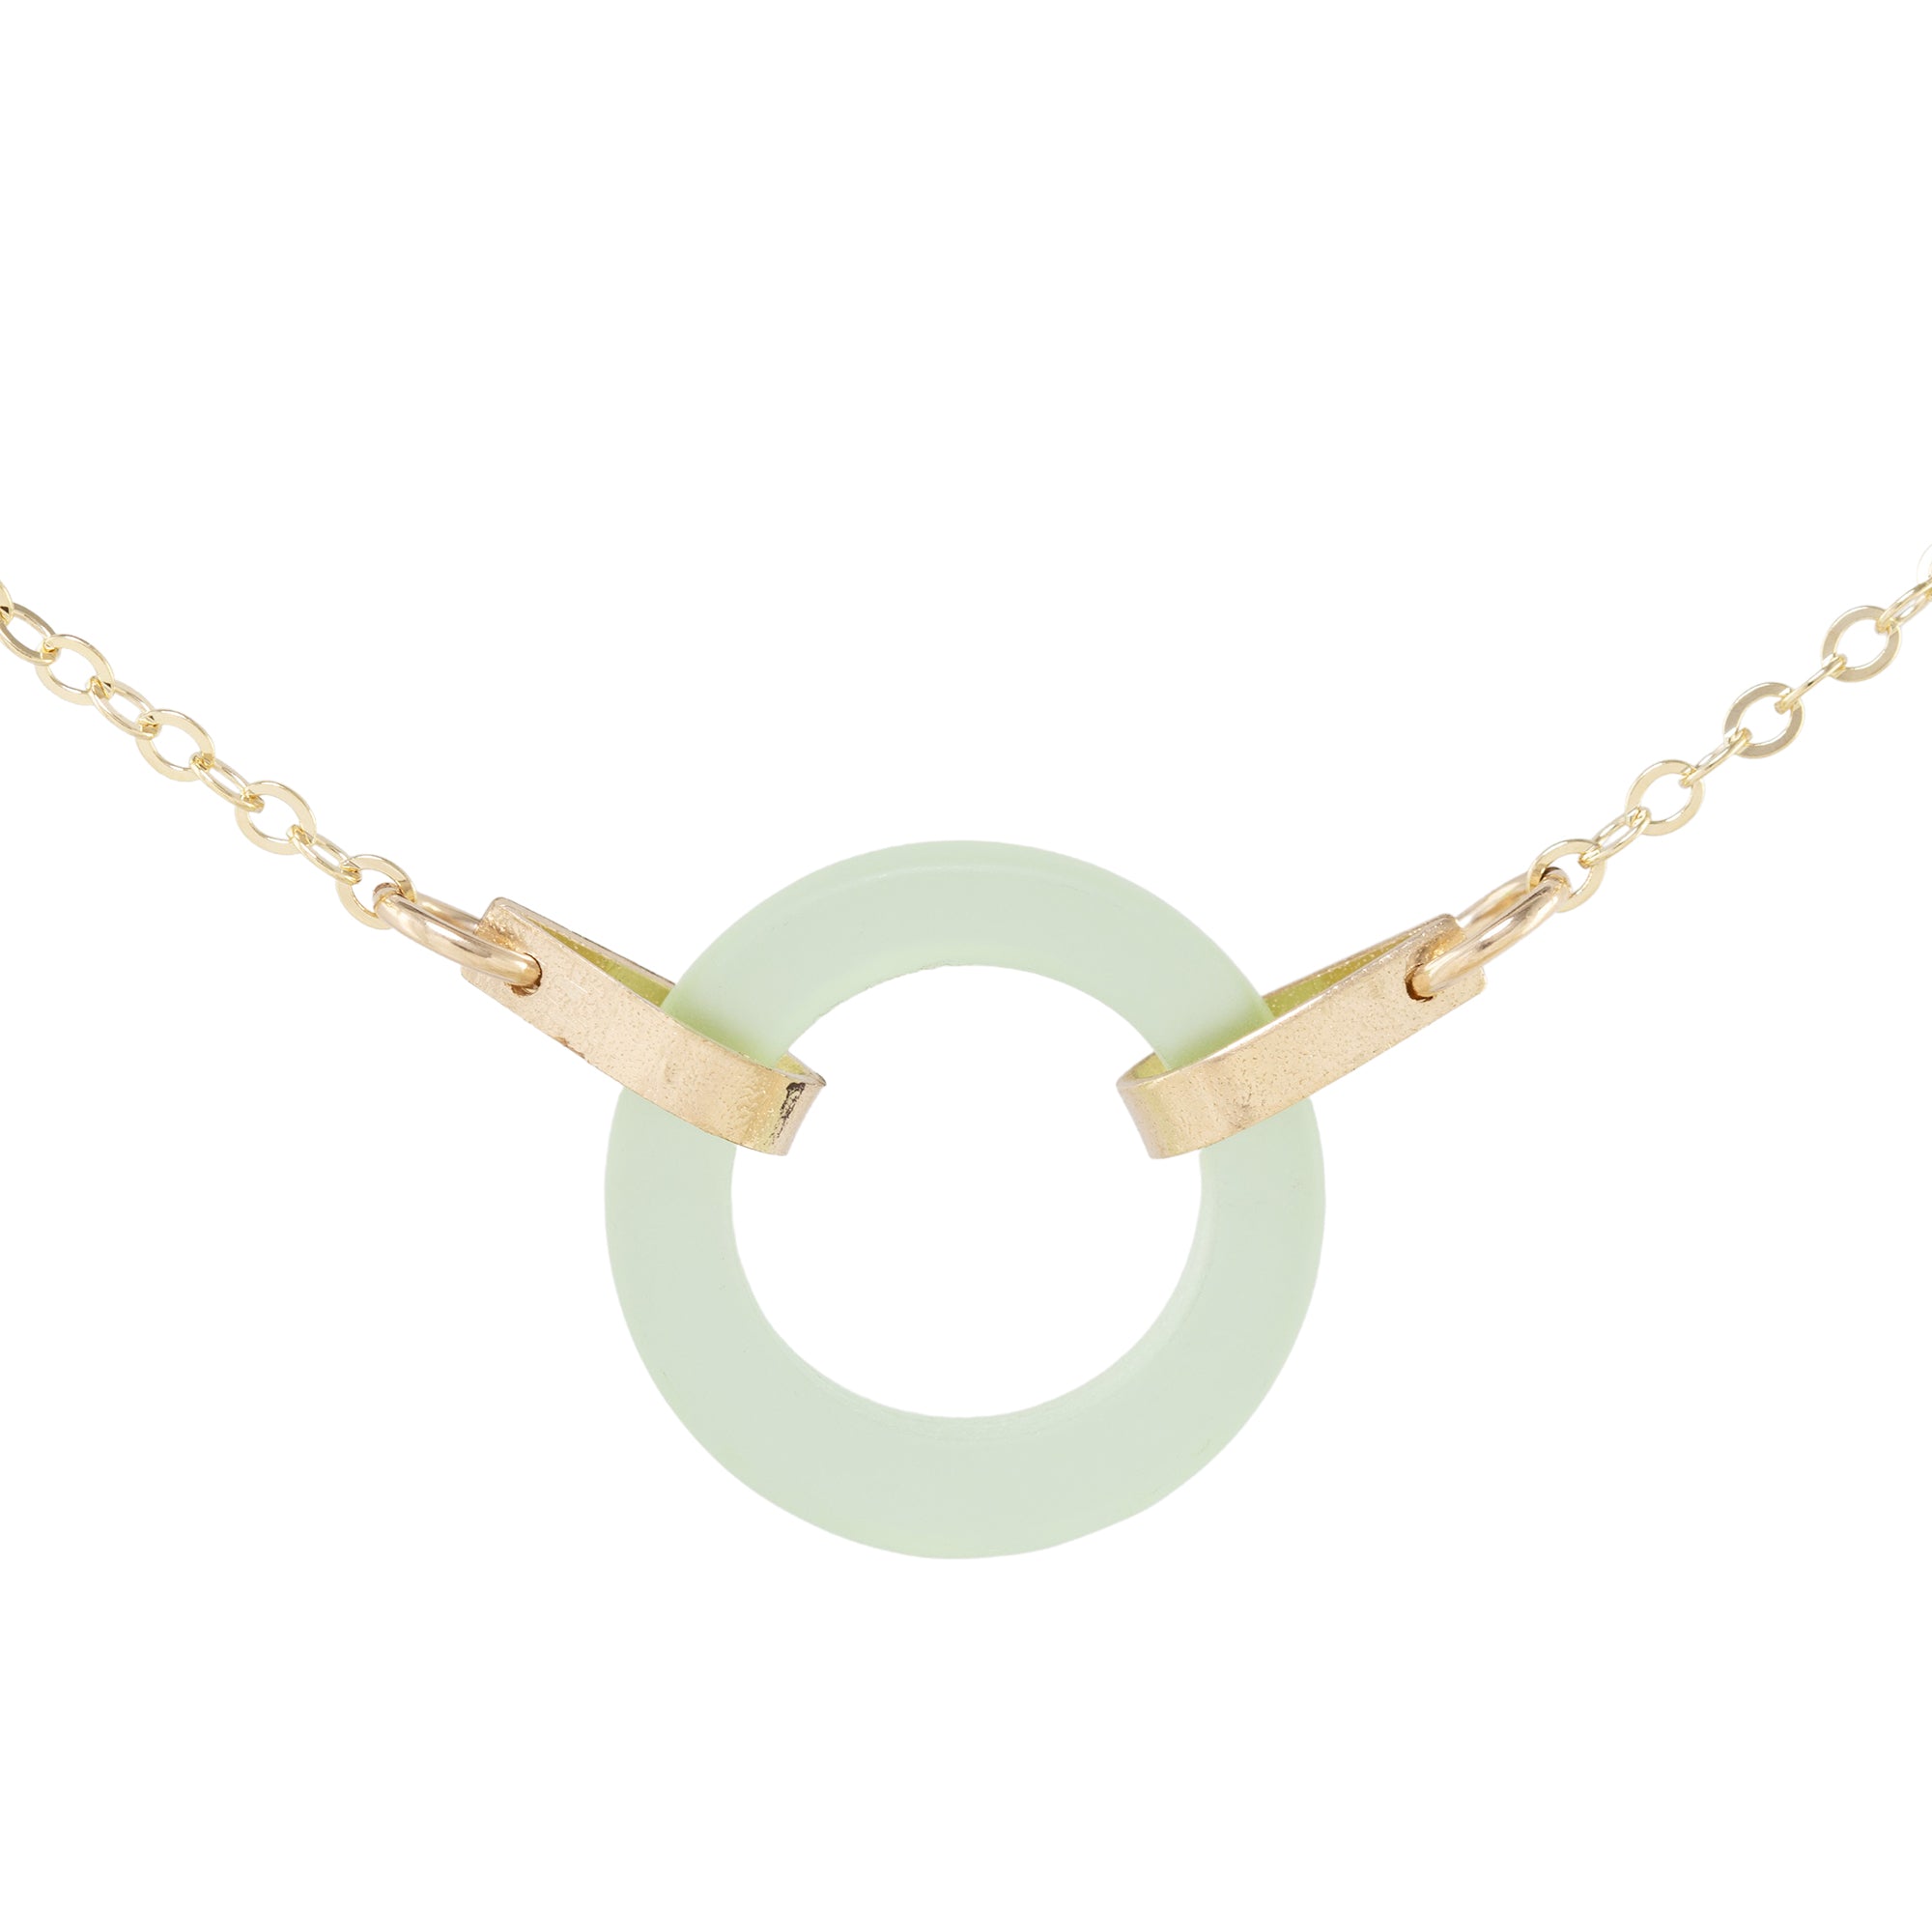 Light Pastel Sage Green Recycled Glass Open Circle and 14K Gold Fill Strap Style Necklace